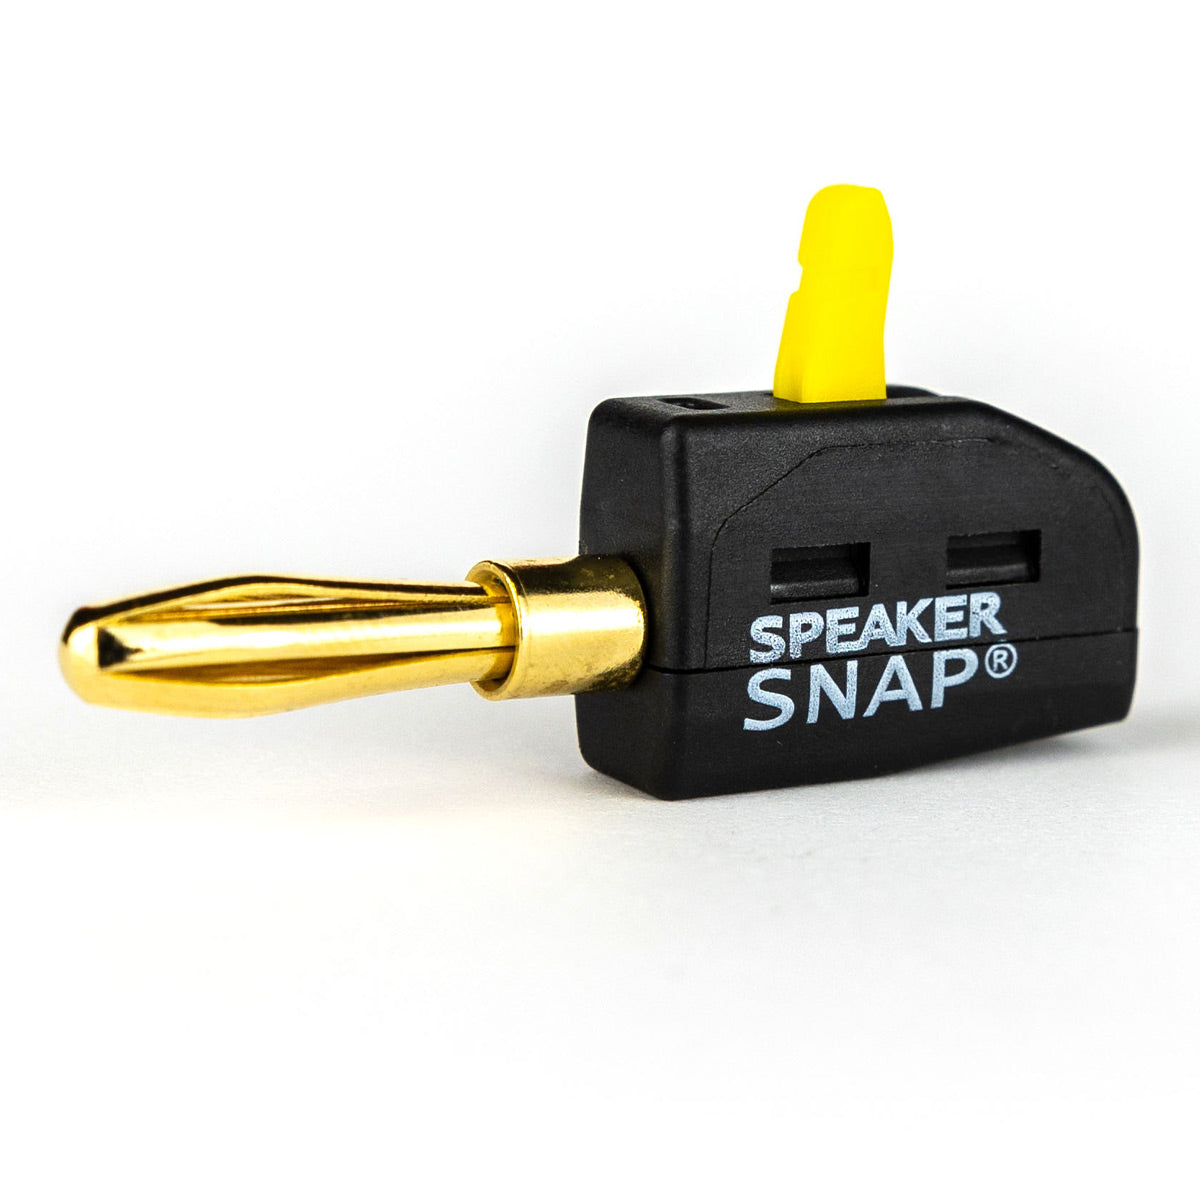 Speaker Snap 12 Count of Fast & Secure Banana Plugs, Gold Plated, 12-24 AWG, for Home Theaters, Speaker Wire, Wall Plates, and Receivers